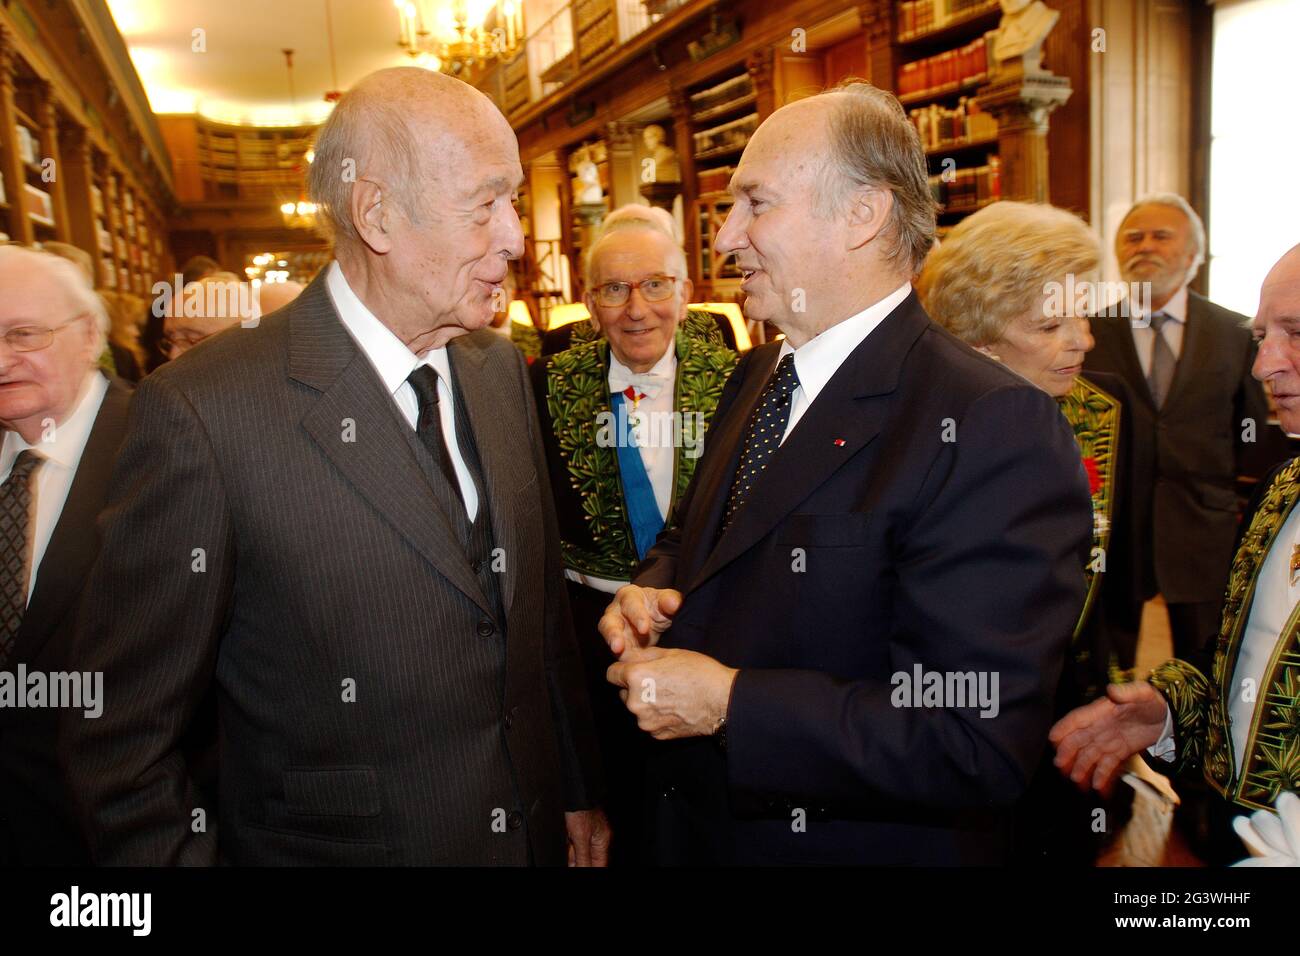 FRANCE. PARIS (75) 6TH ARR. INSTITUTE OF FRANCE. THE ACADEMICIANS' HEADQUARTERS. A MEETING BETWEEN THE AGA KAHN AND VALERY GISCARD D'ESTAING INSIDE TH Stock Photo